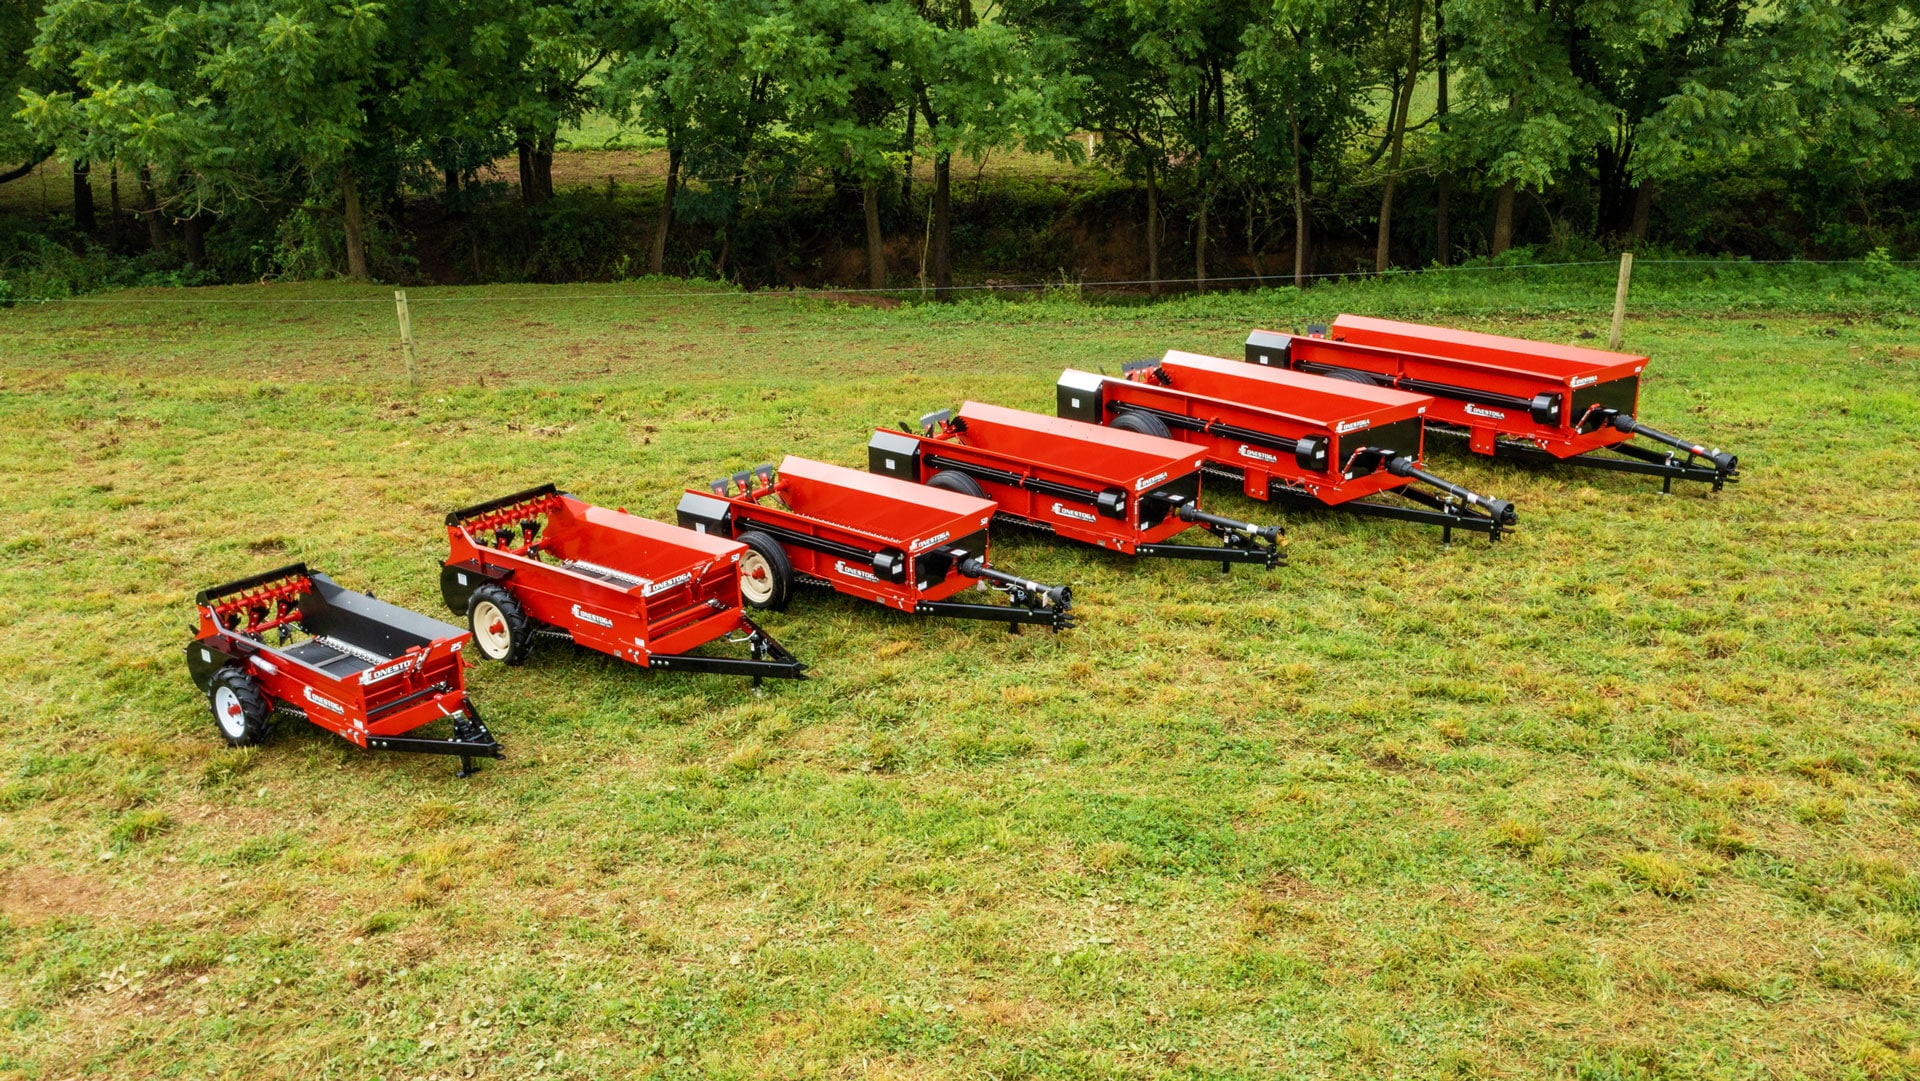 7 questions to ask before you buy a manure spreader conestoga manure spreaders 4